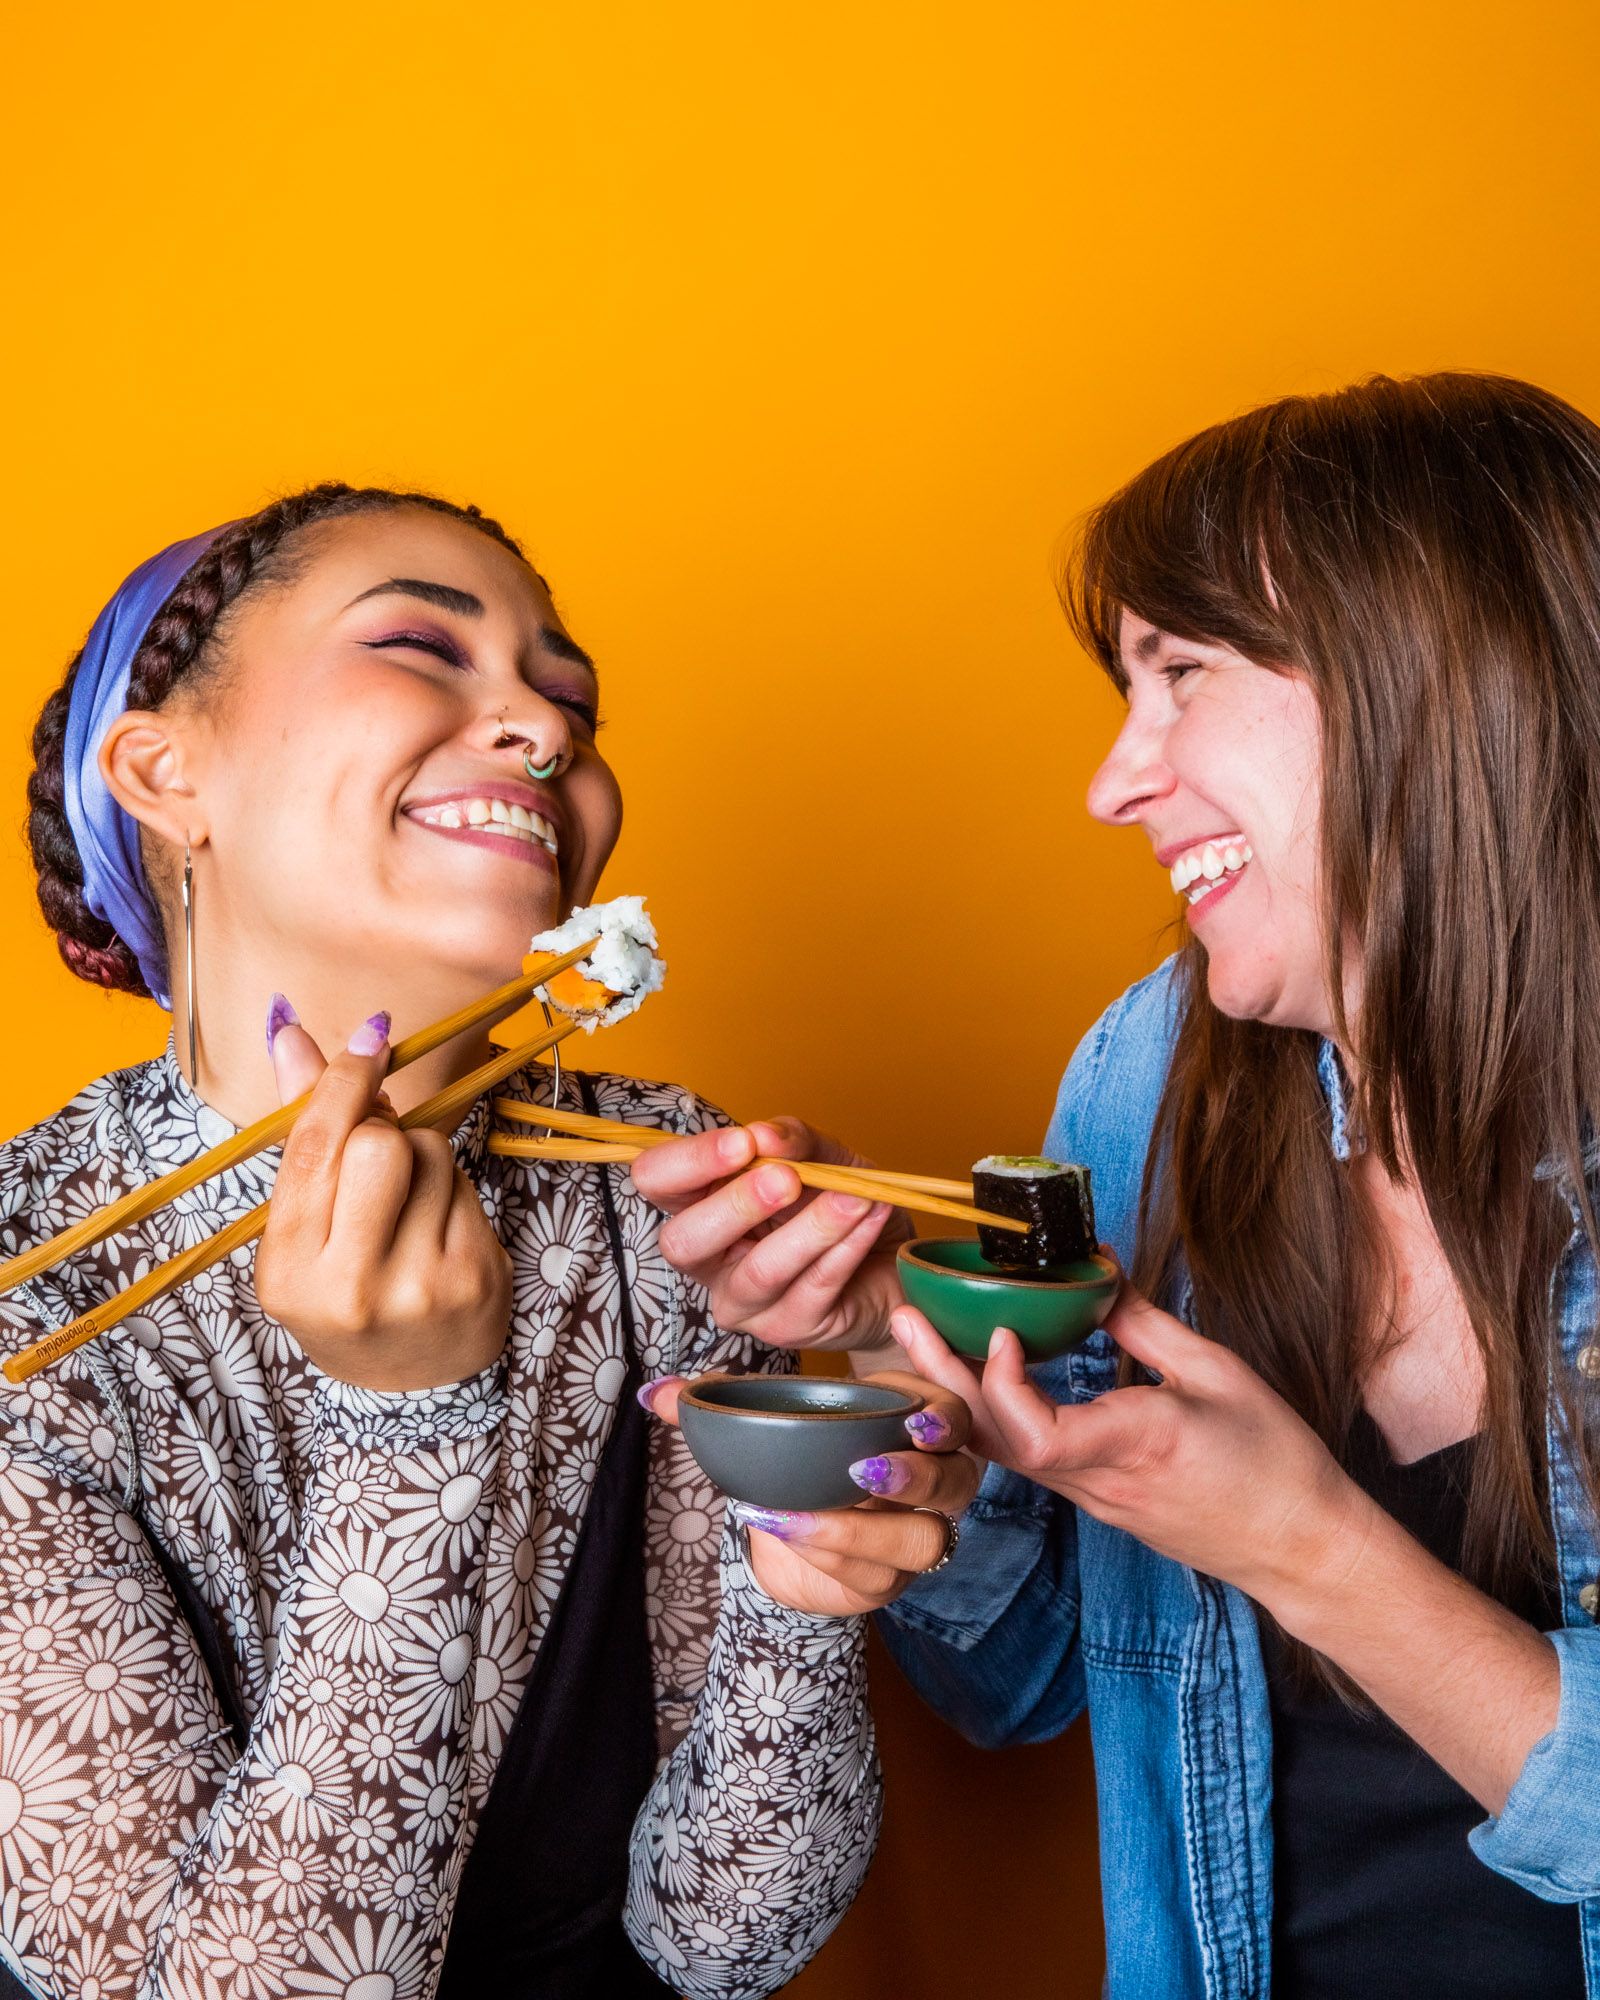 Two people, smiling at each other against a yellow backdrop, holding chopsticks with sushi in one hand and a little bowl in grey and green respectively.